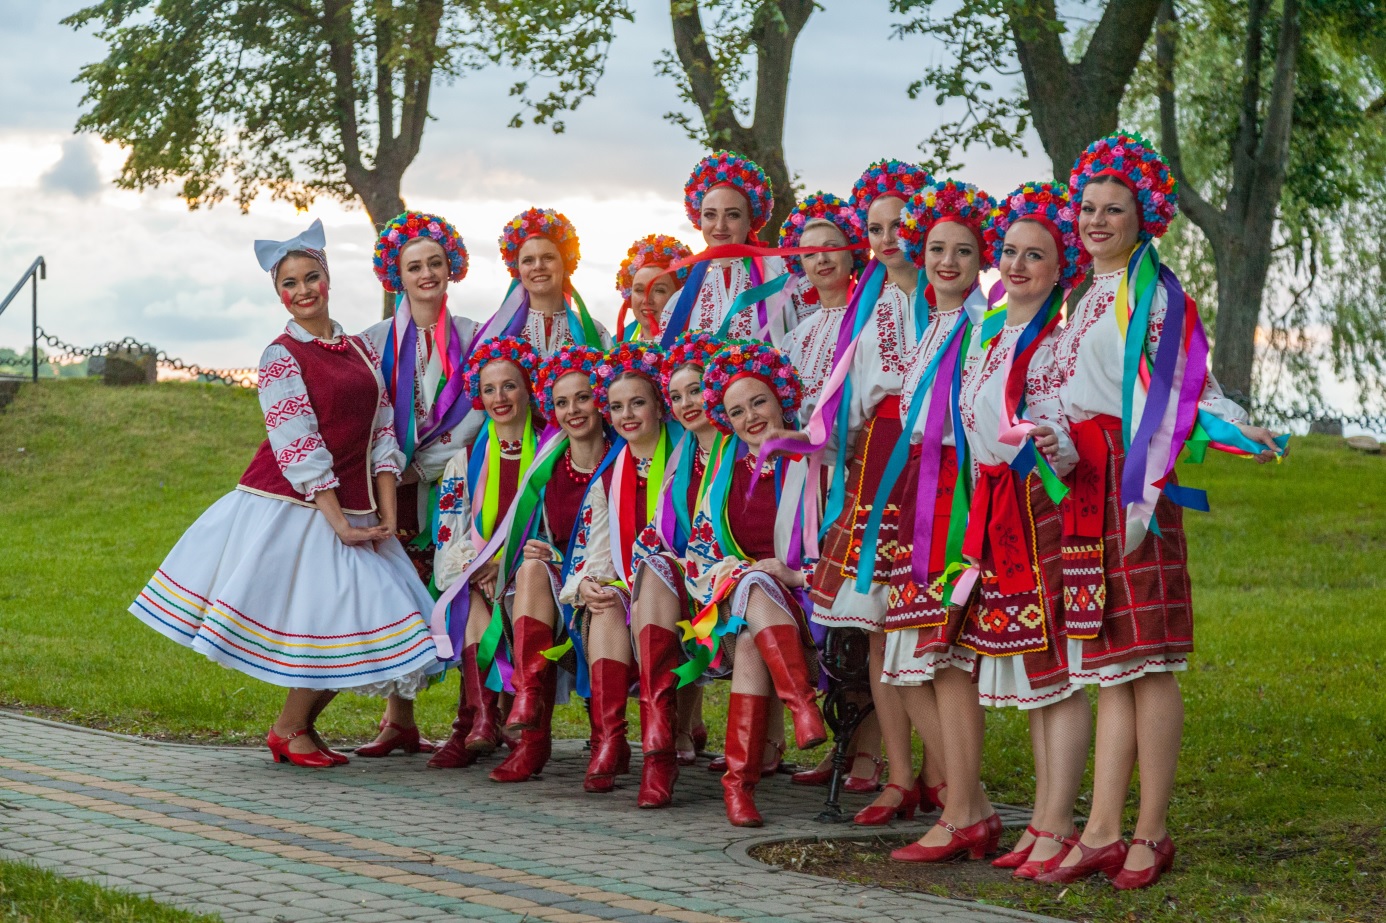 World Folklore Festival "RAINBOW" in the capital of Mazury